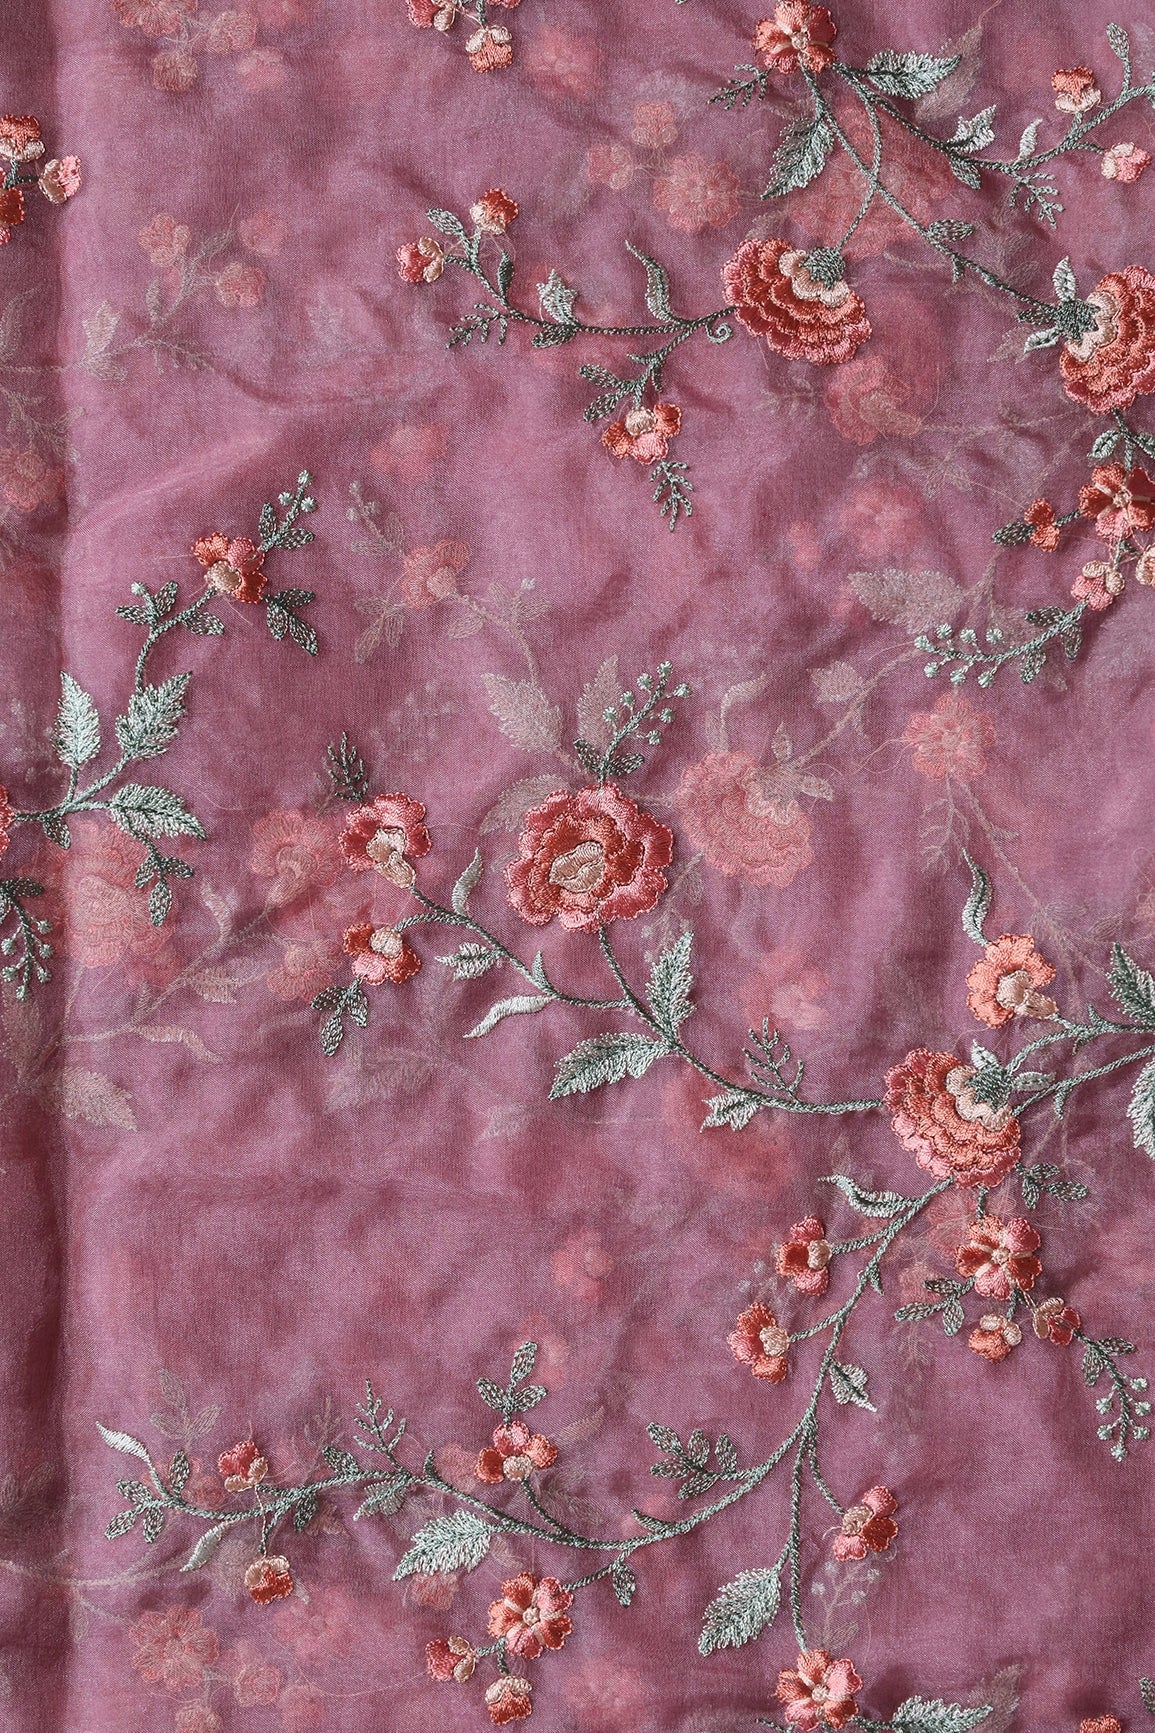 Brown And Light Green Thread Floral Embroidery Work On Onion Pink Organza Fabric - doeraa